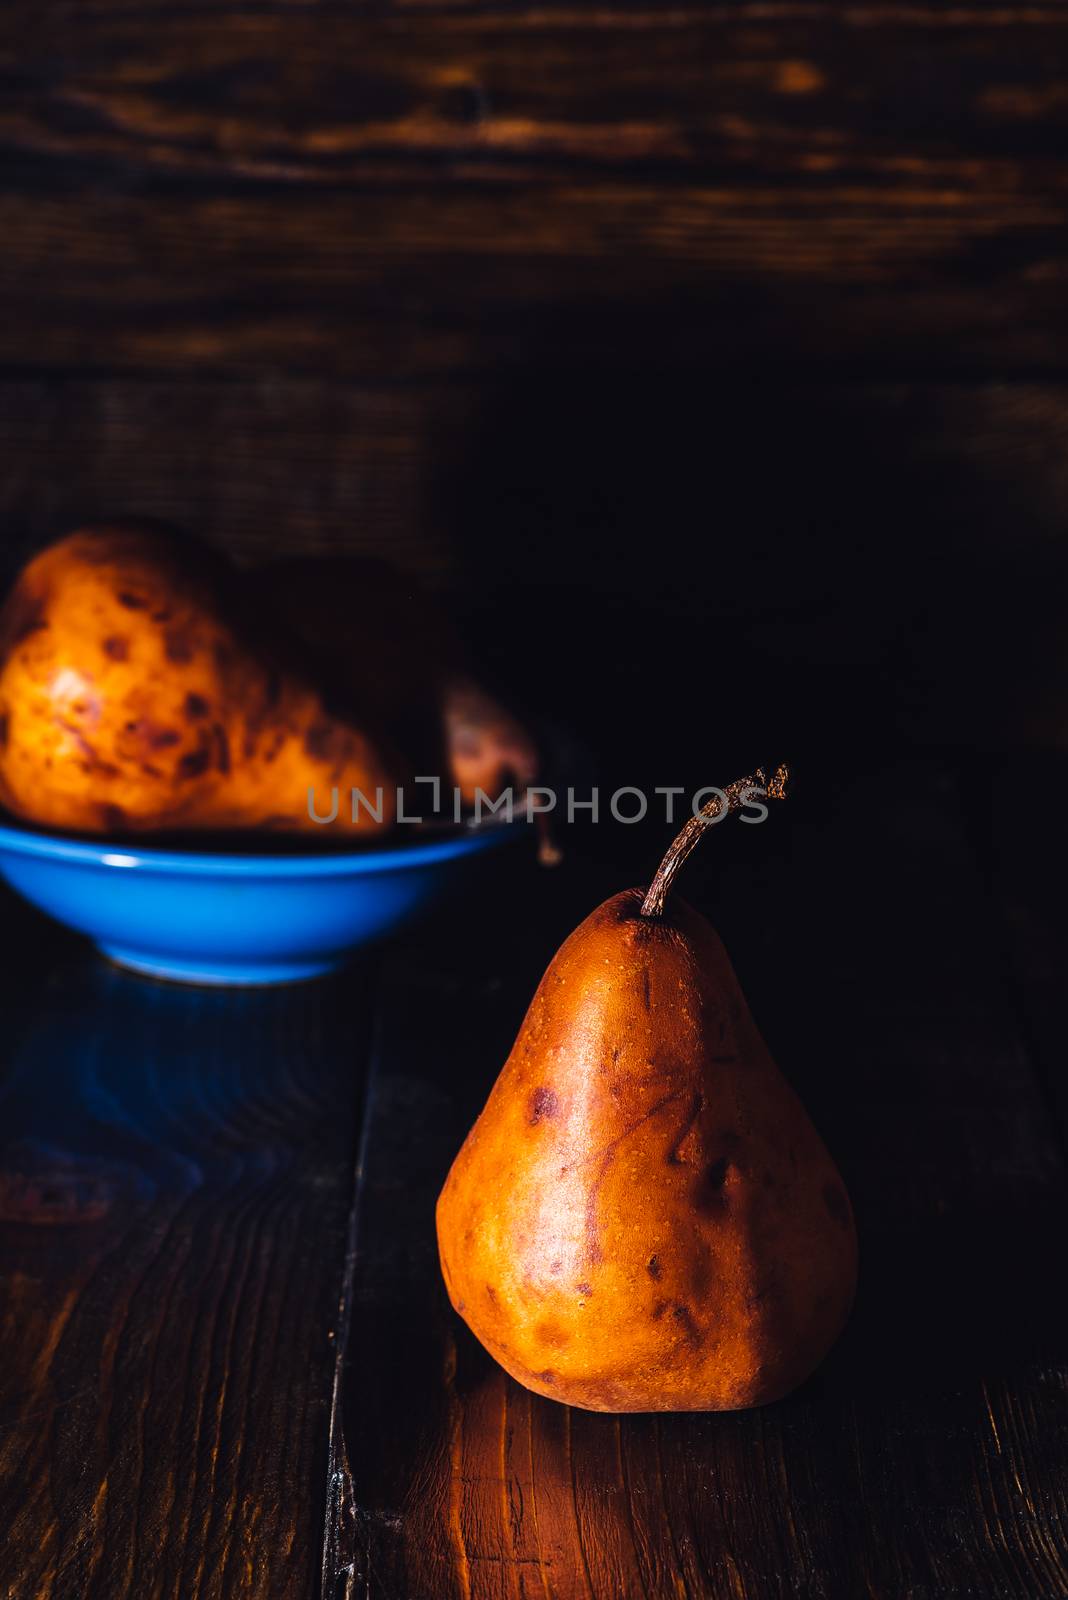 Golden Pear and Some Pears in Blue Bowl on Background